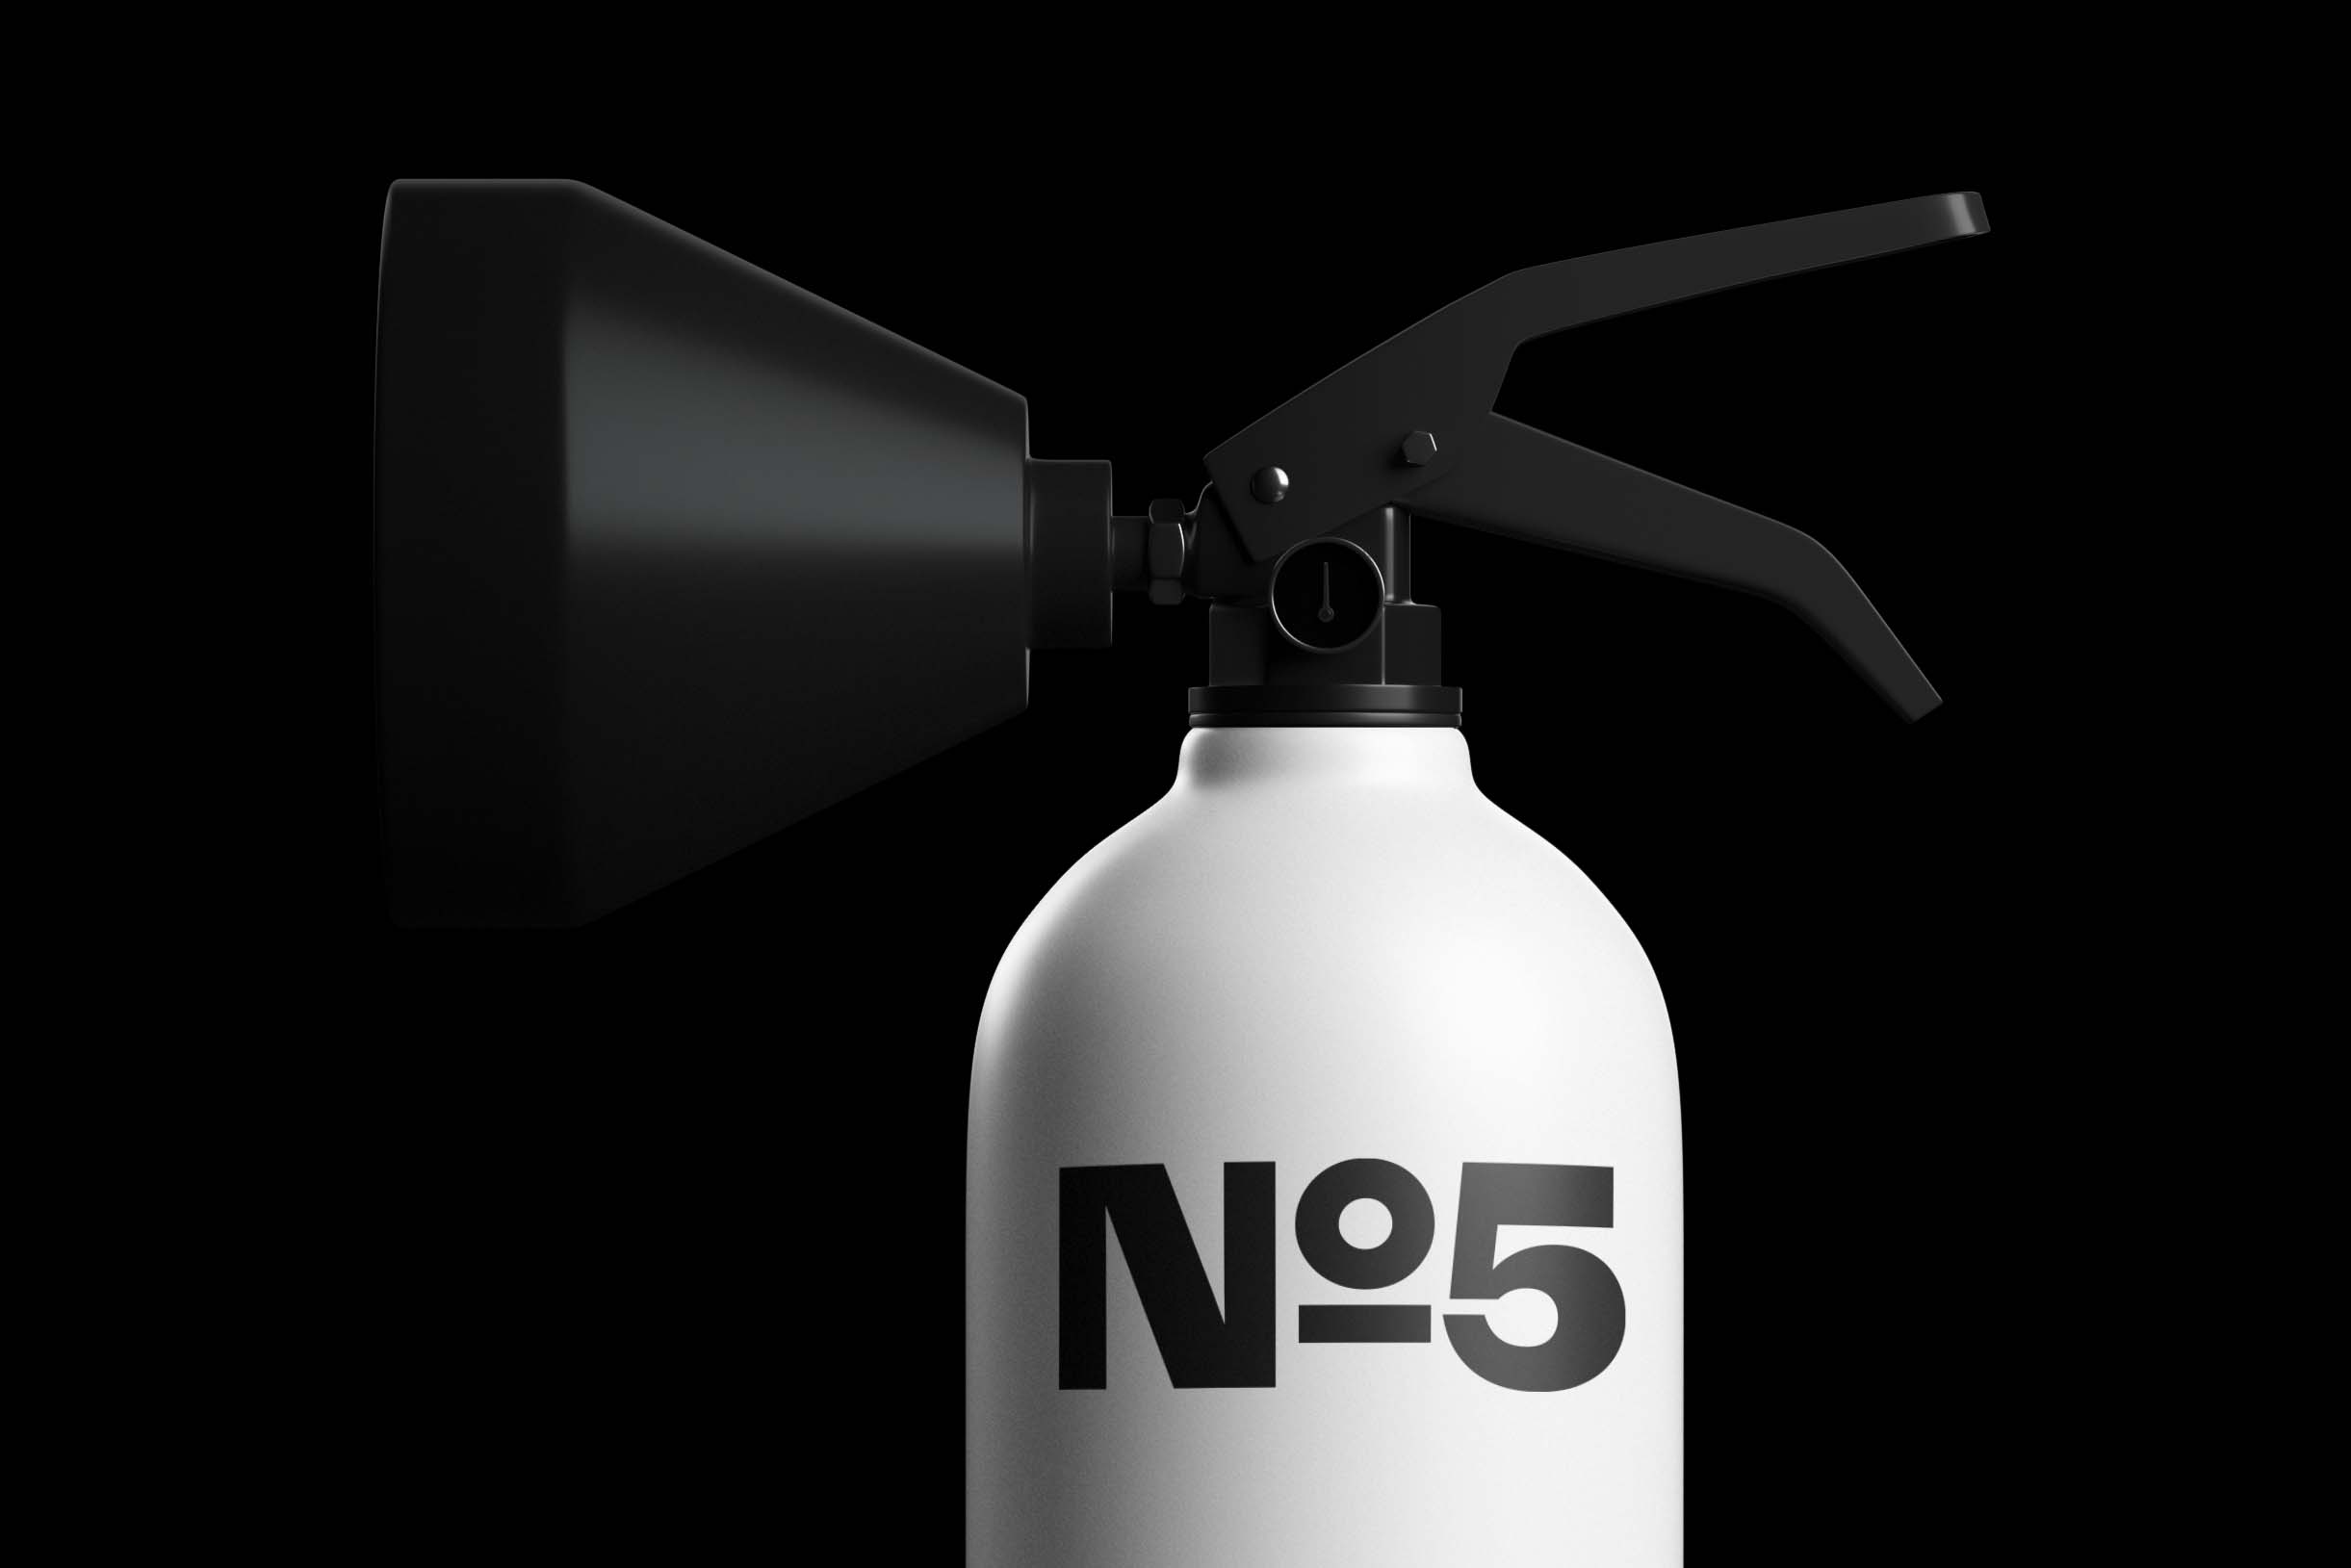 3D spray bottle template with minimalist black and white design, isolated on black background, perfect for mockup projects and graphic design.